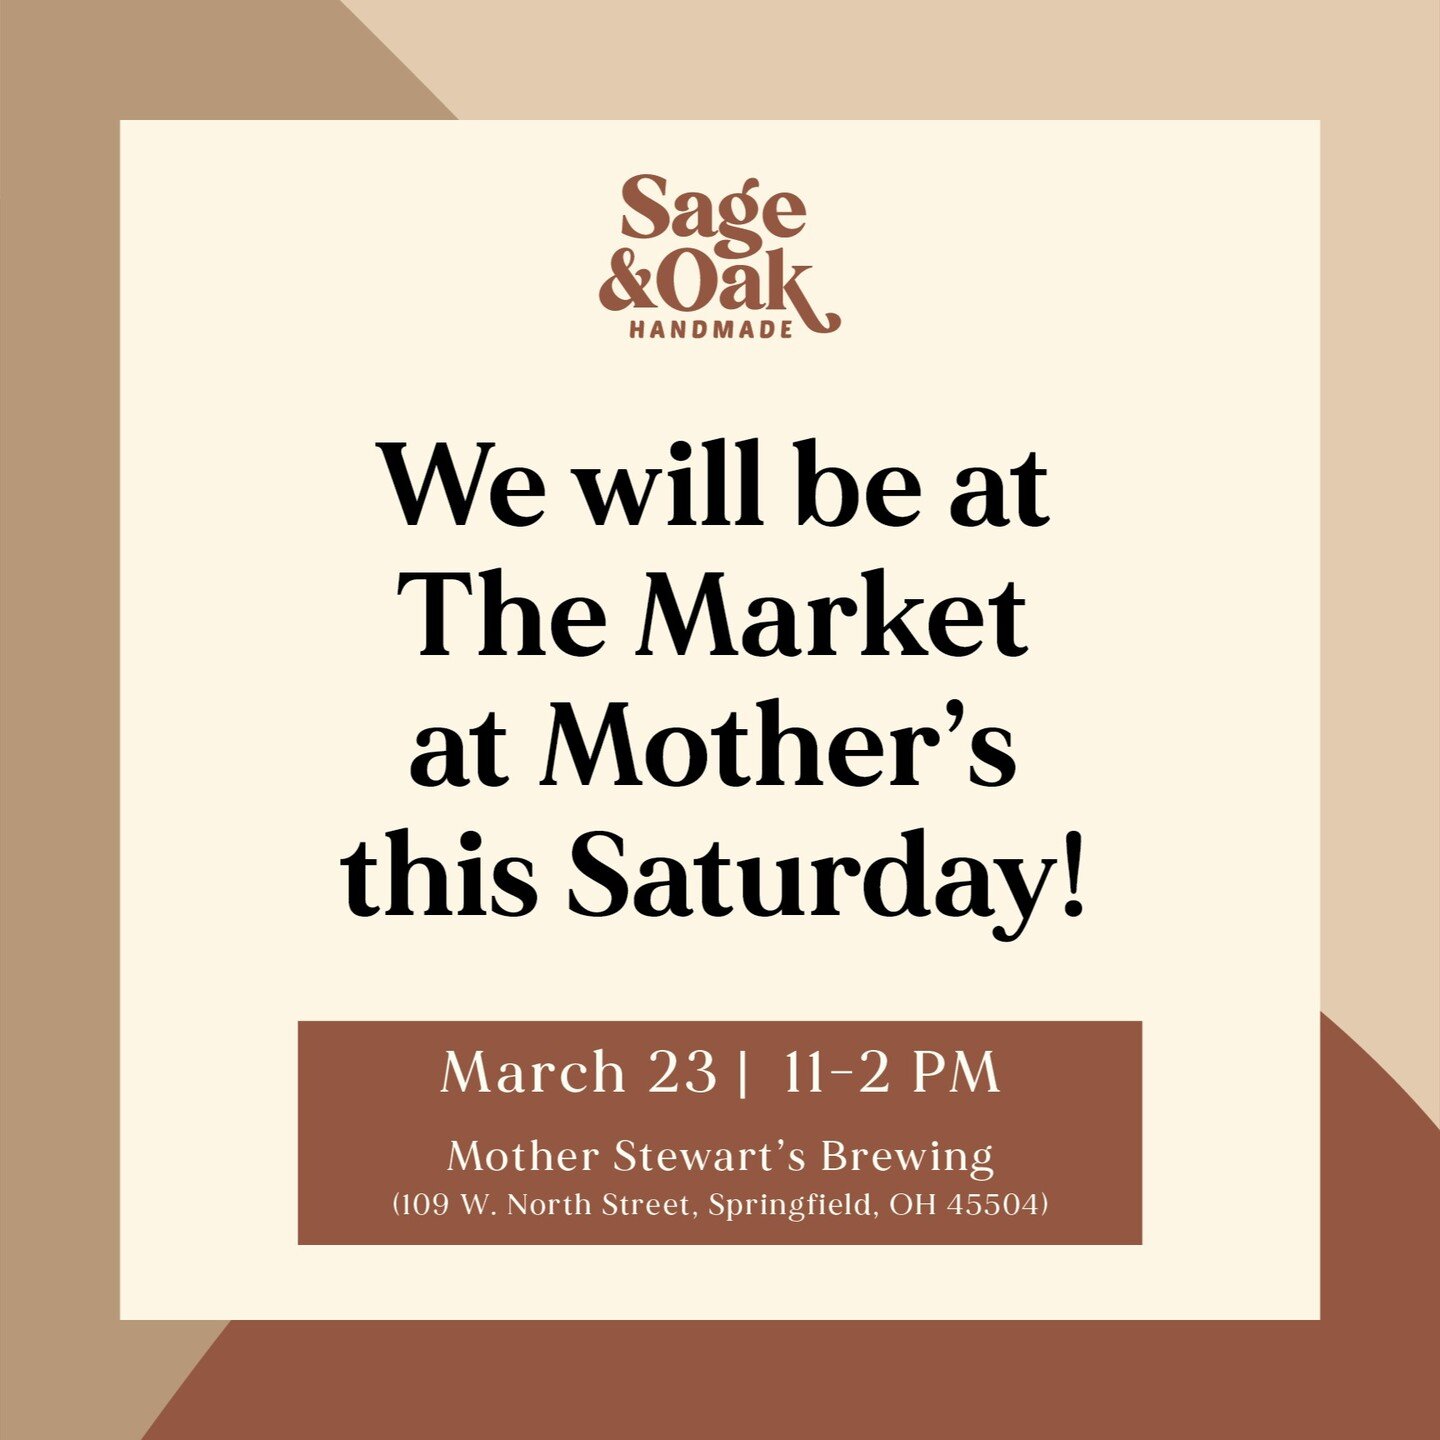 This weekend is our final weekend at @themarketatmothers for this season and we hope you can join us! 🥰

We have been setting up at the Market at Mother's every other Saturday since January and we've had the best time getting to meet and chat with a